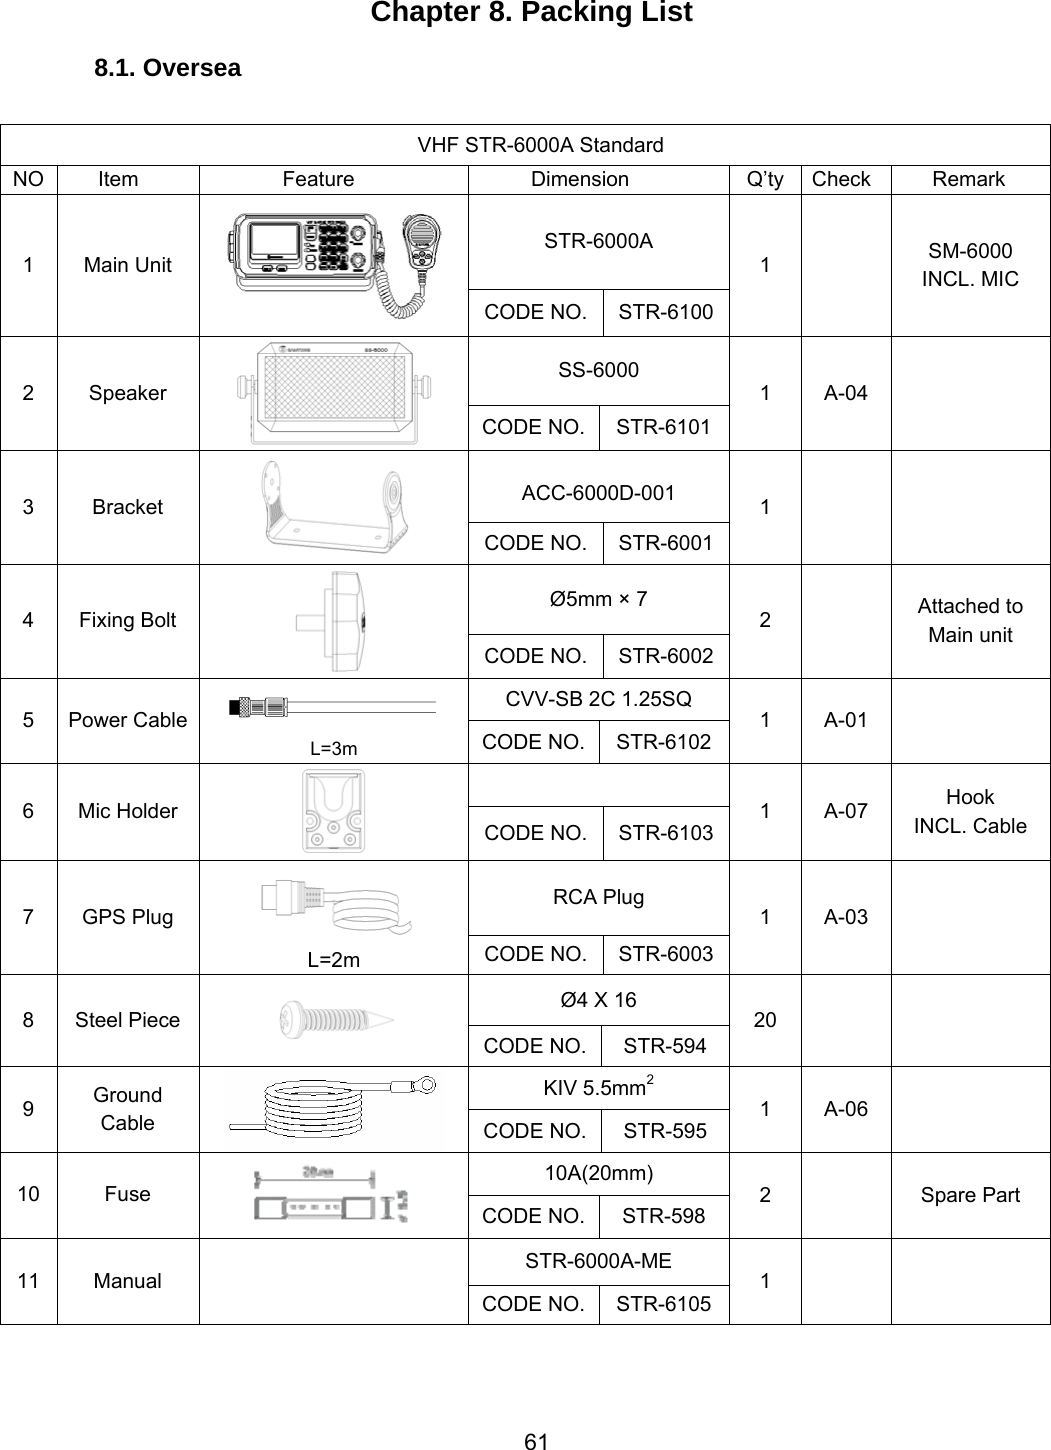 61 Chapter 8. Packing List 8.1. Oversea  VHF STR-6000A Standard NO   Item         Feature  Dimension  Q’ty Check  Remark STR-6000A 1 Main Unit  CODE NO. STR-61001  SM-6000 INCL. MIC SS-6000 2 Speaker  CODE NO. STR-61011 A-04   ACC-6000D-001 3 Bracket  CODE NO. STR-60011   Ø5mm × 7 4 Fixing Bolt  CODE NO. STR-60022  Attached to Main unit CVV-SB 2C 1.25SQ 5 Power Cable   L=3m CODE NO. STR-61021 A-01   6 Mic Holder  CODE NO. STR-61031 A-07  Hook INCL. Cable RCA Plug 7 GPS Plug   L=2m  CODE NO. STR-60031 A-03  Ø4 X 16 8 Steel Piece   CODE NO. STR-594 20   KIV 5.5mm2 9  Ground Cable   CODE NO. STR-595 1 A-06  10A(20mm) 10 Fuse  CODE NO. STR-598 2  Spare Part STR-6000A-ME 11 Manual  CODE NO. STR-61051    